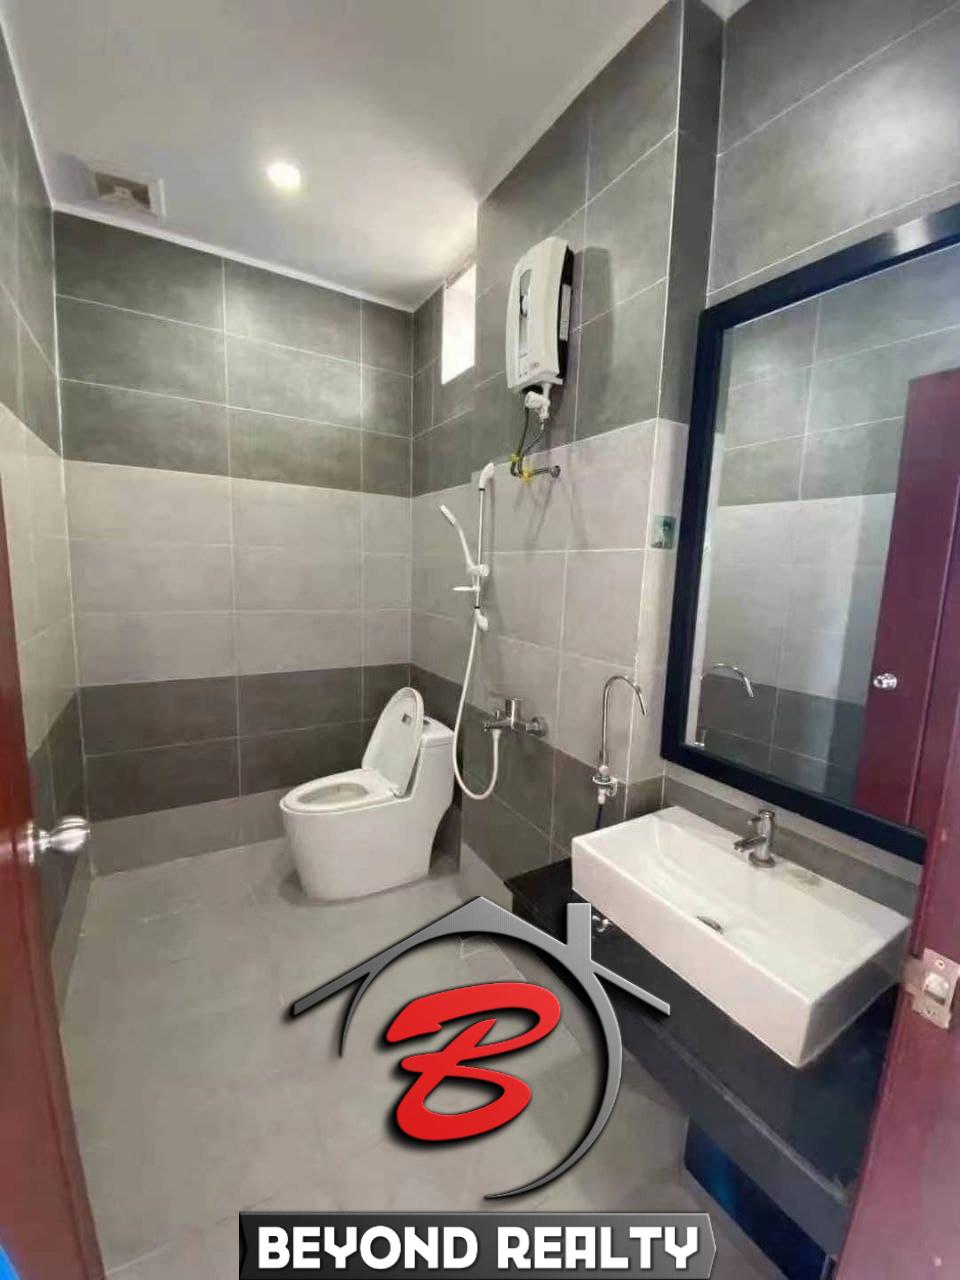 bathroom of the apartment building for rent in Sihanoukville